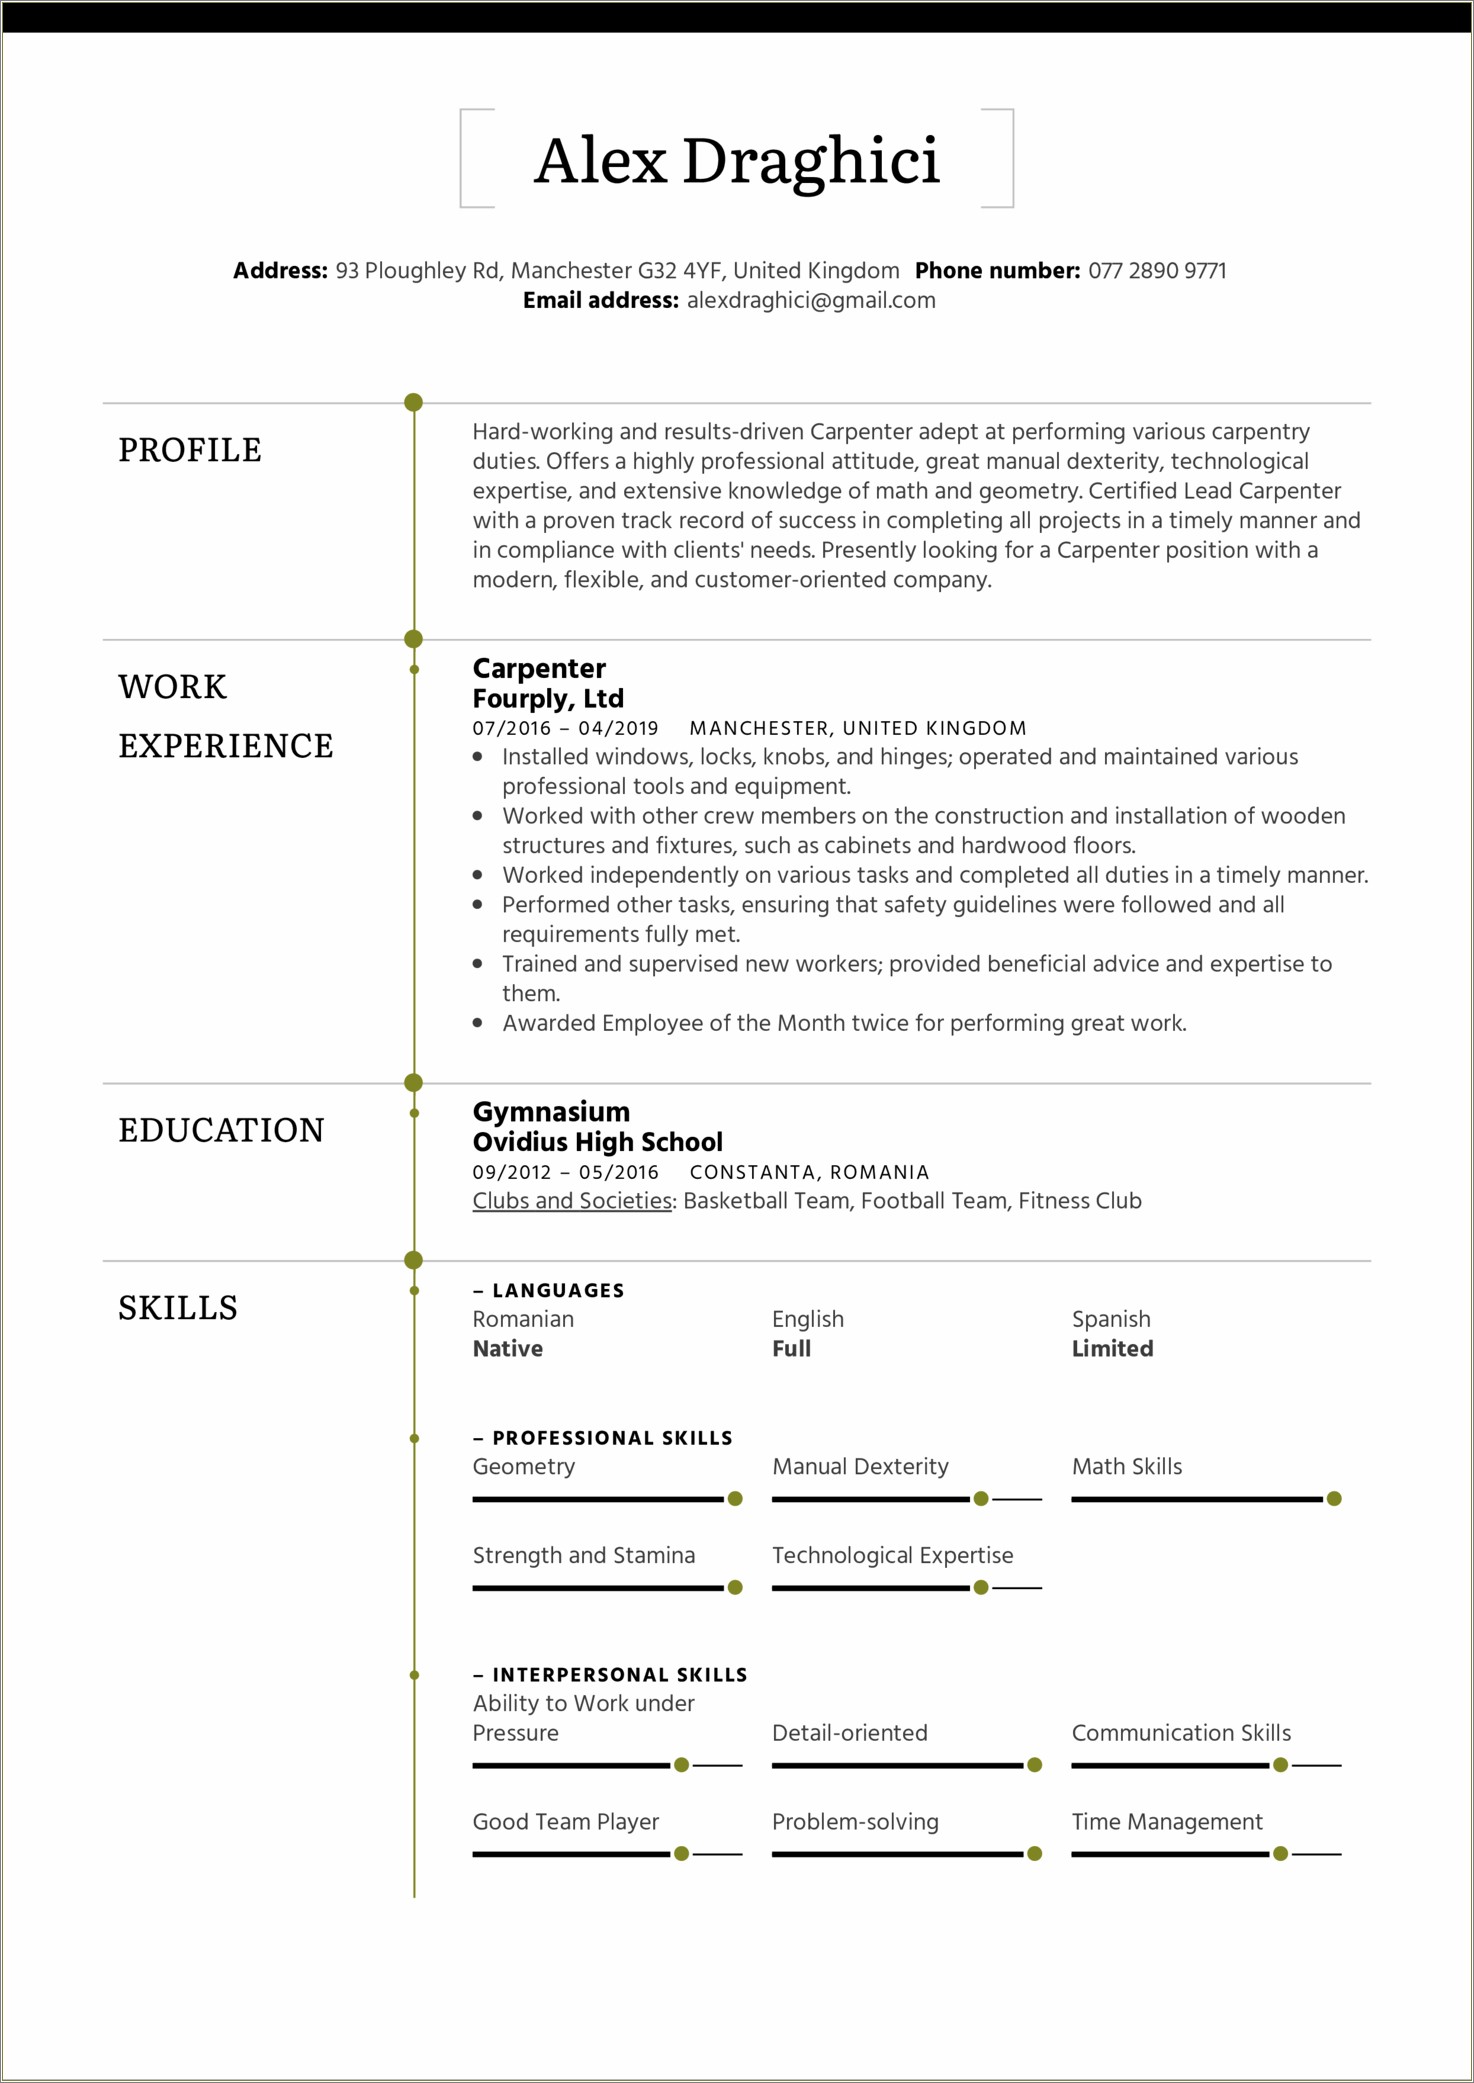 Examples Of Functional Lead Carpenter Resume